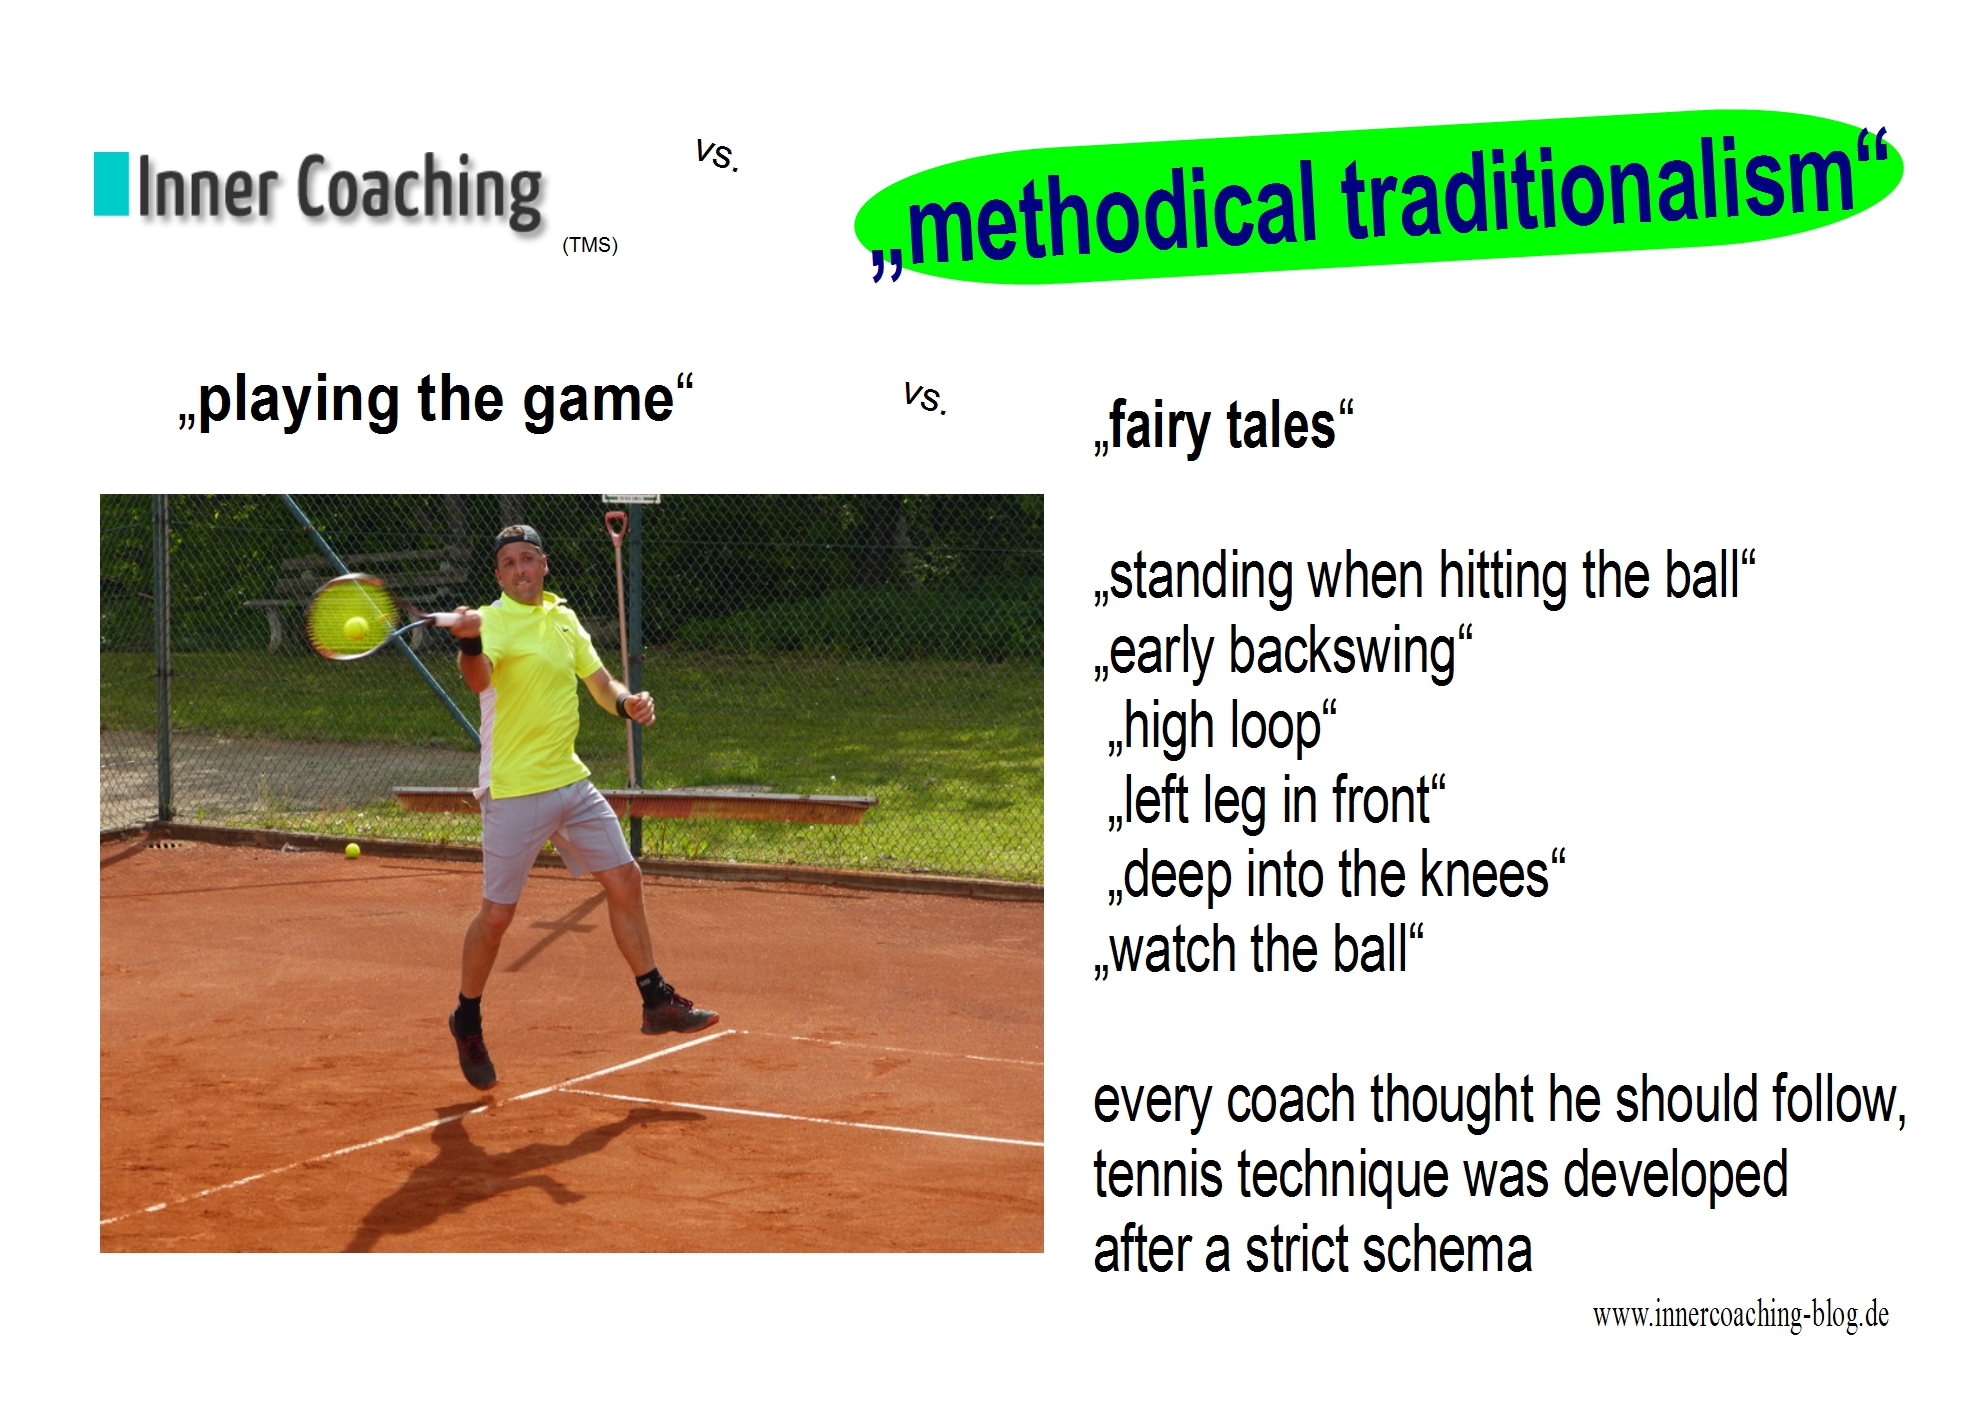 INNER COACHING (TMS) or Methodical traditionalism